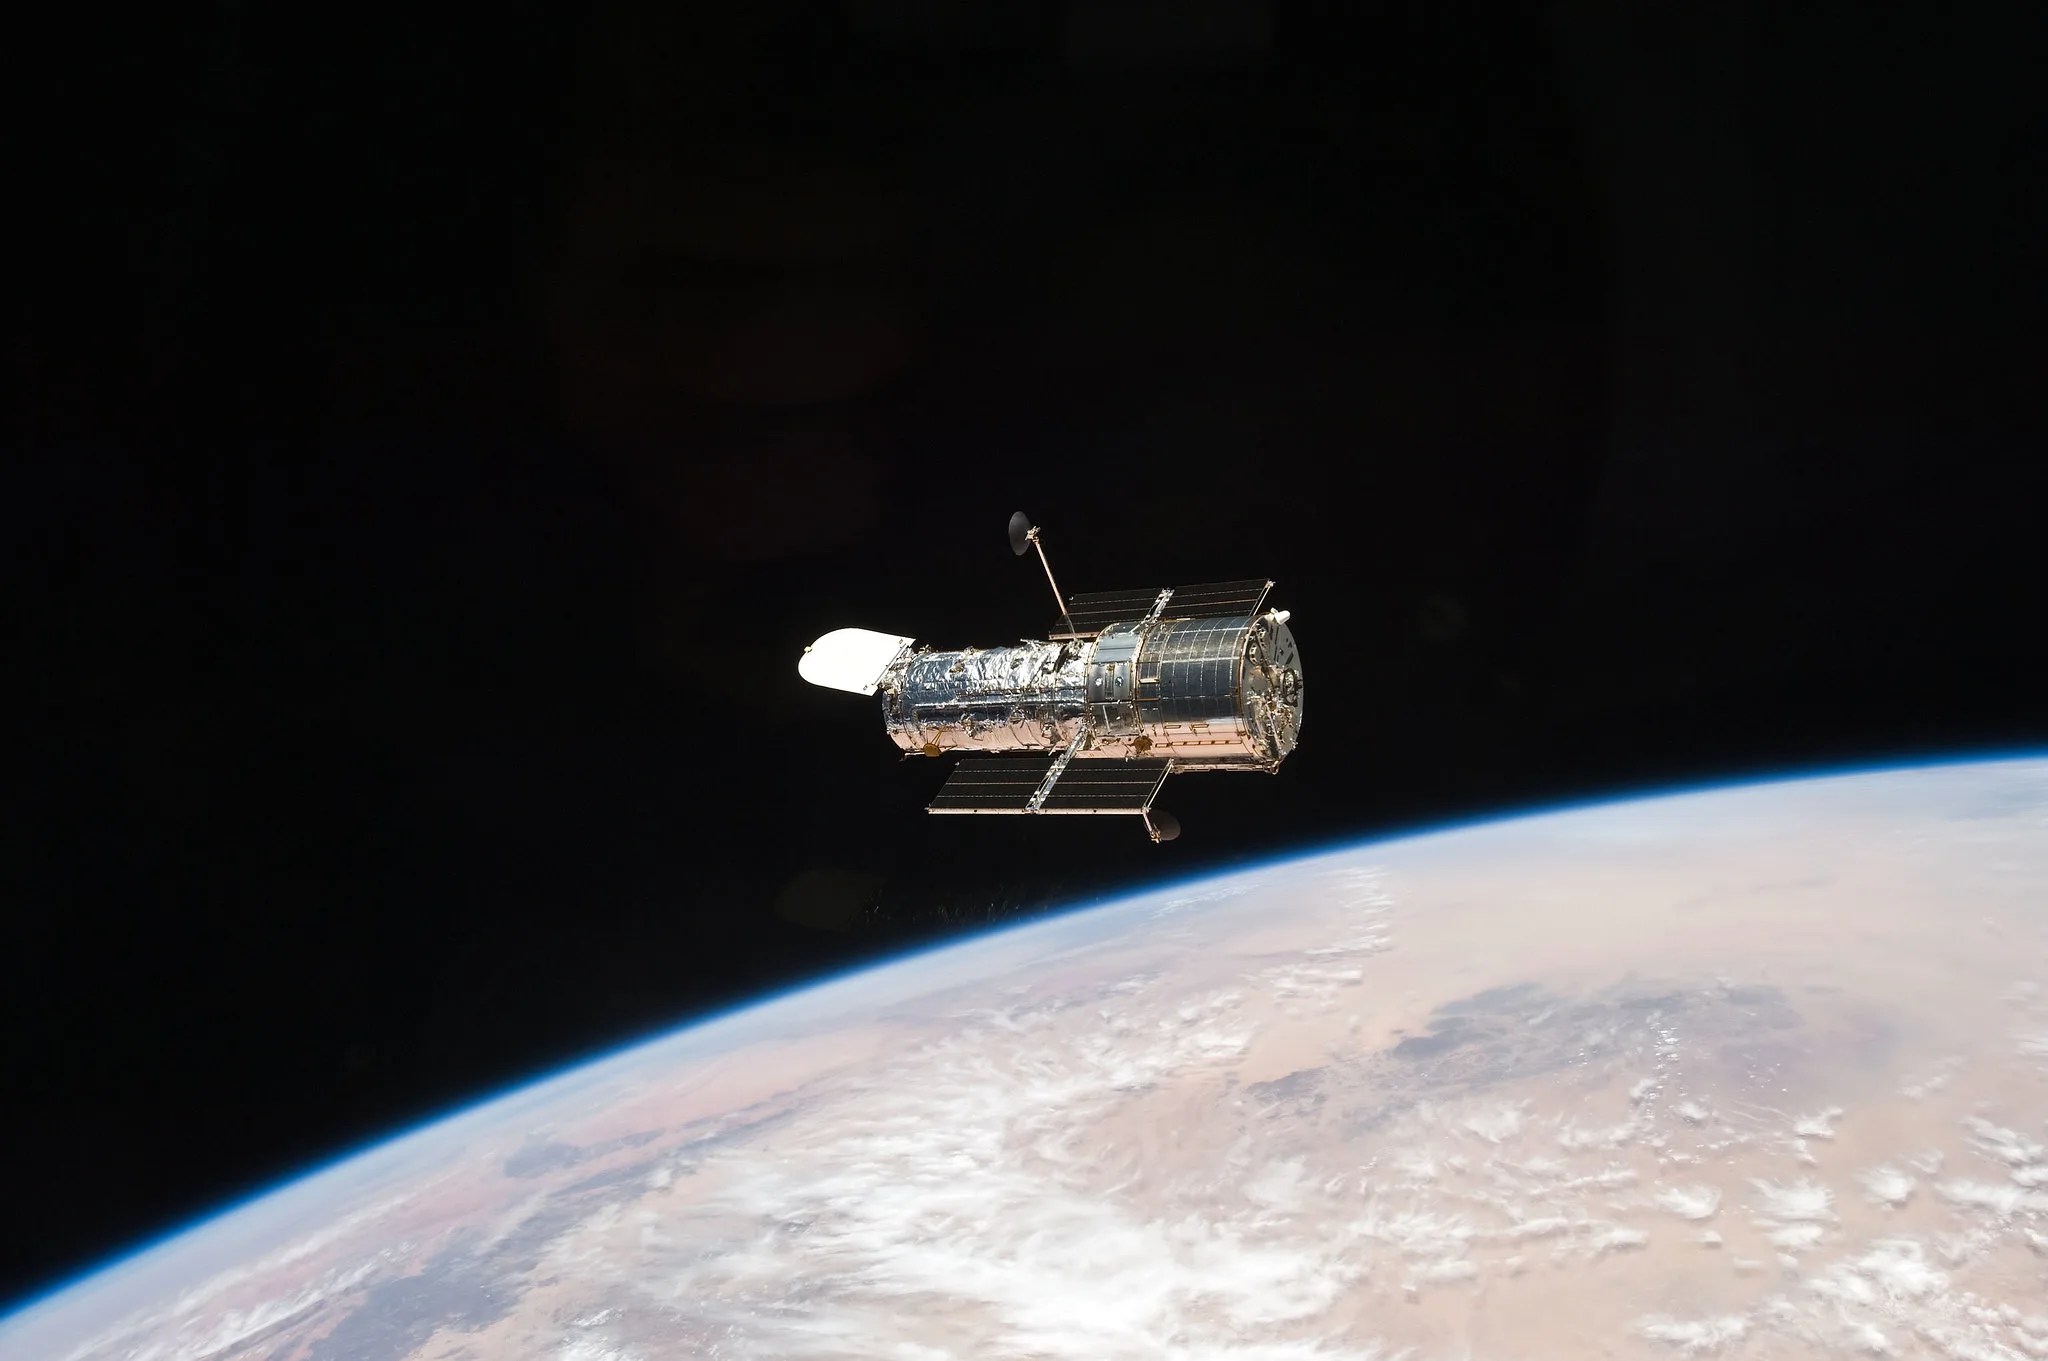 Hubble floats against a black background of space with the curve of Earth visible below it in this astronaut photo.